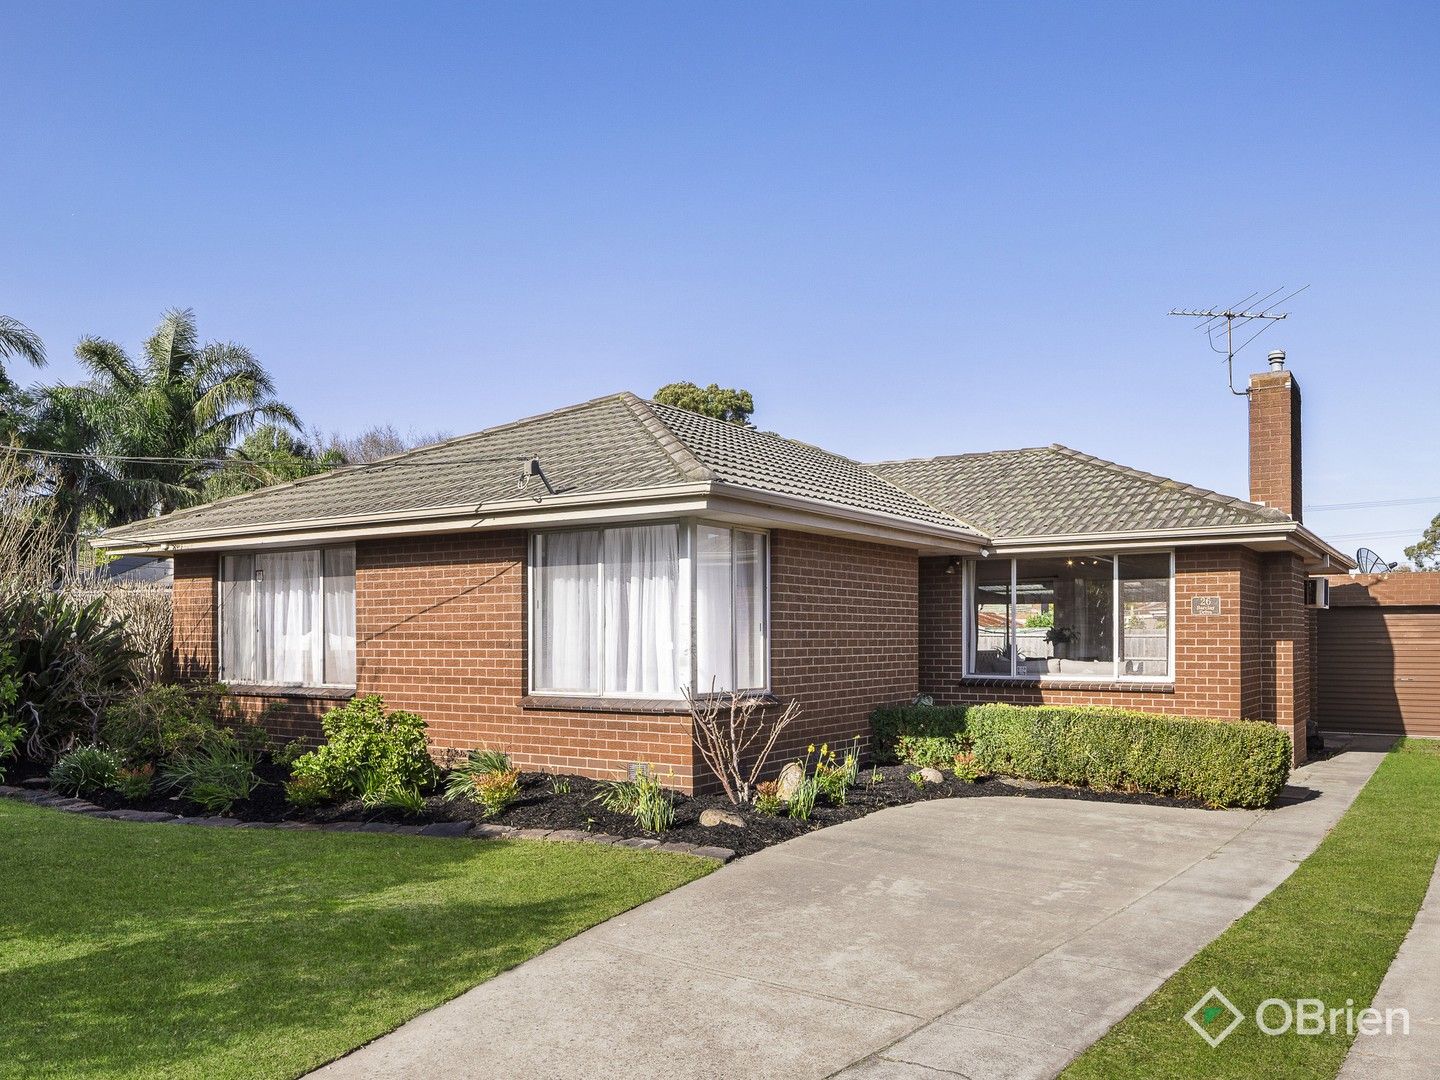 3 bedrooms House in 26 Barclay Drive CHELTENHAM VIC, 3192